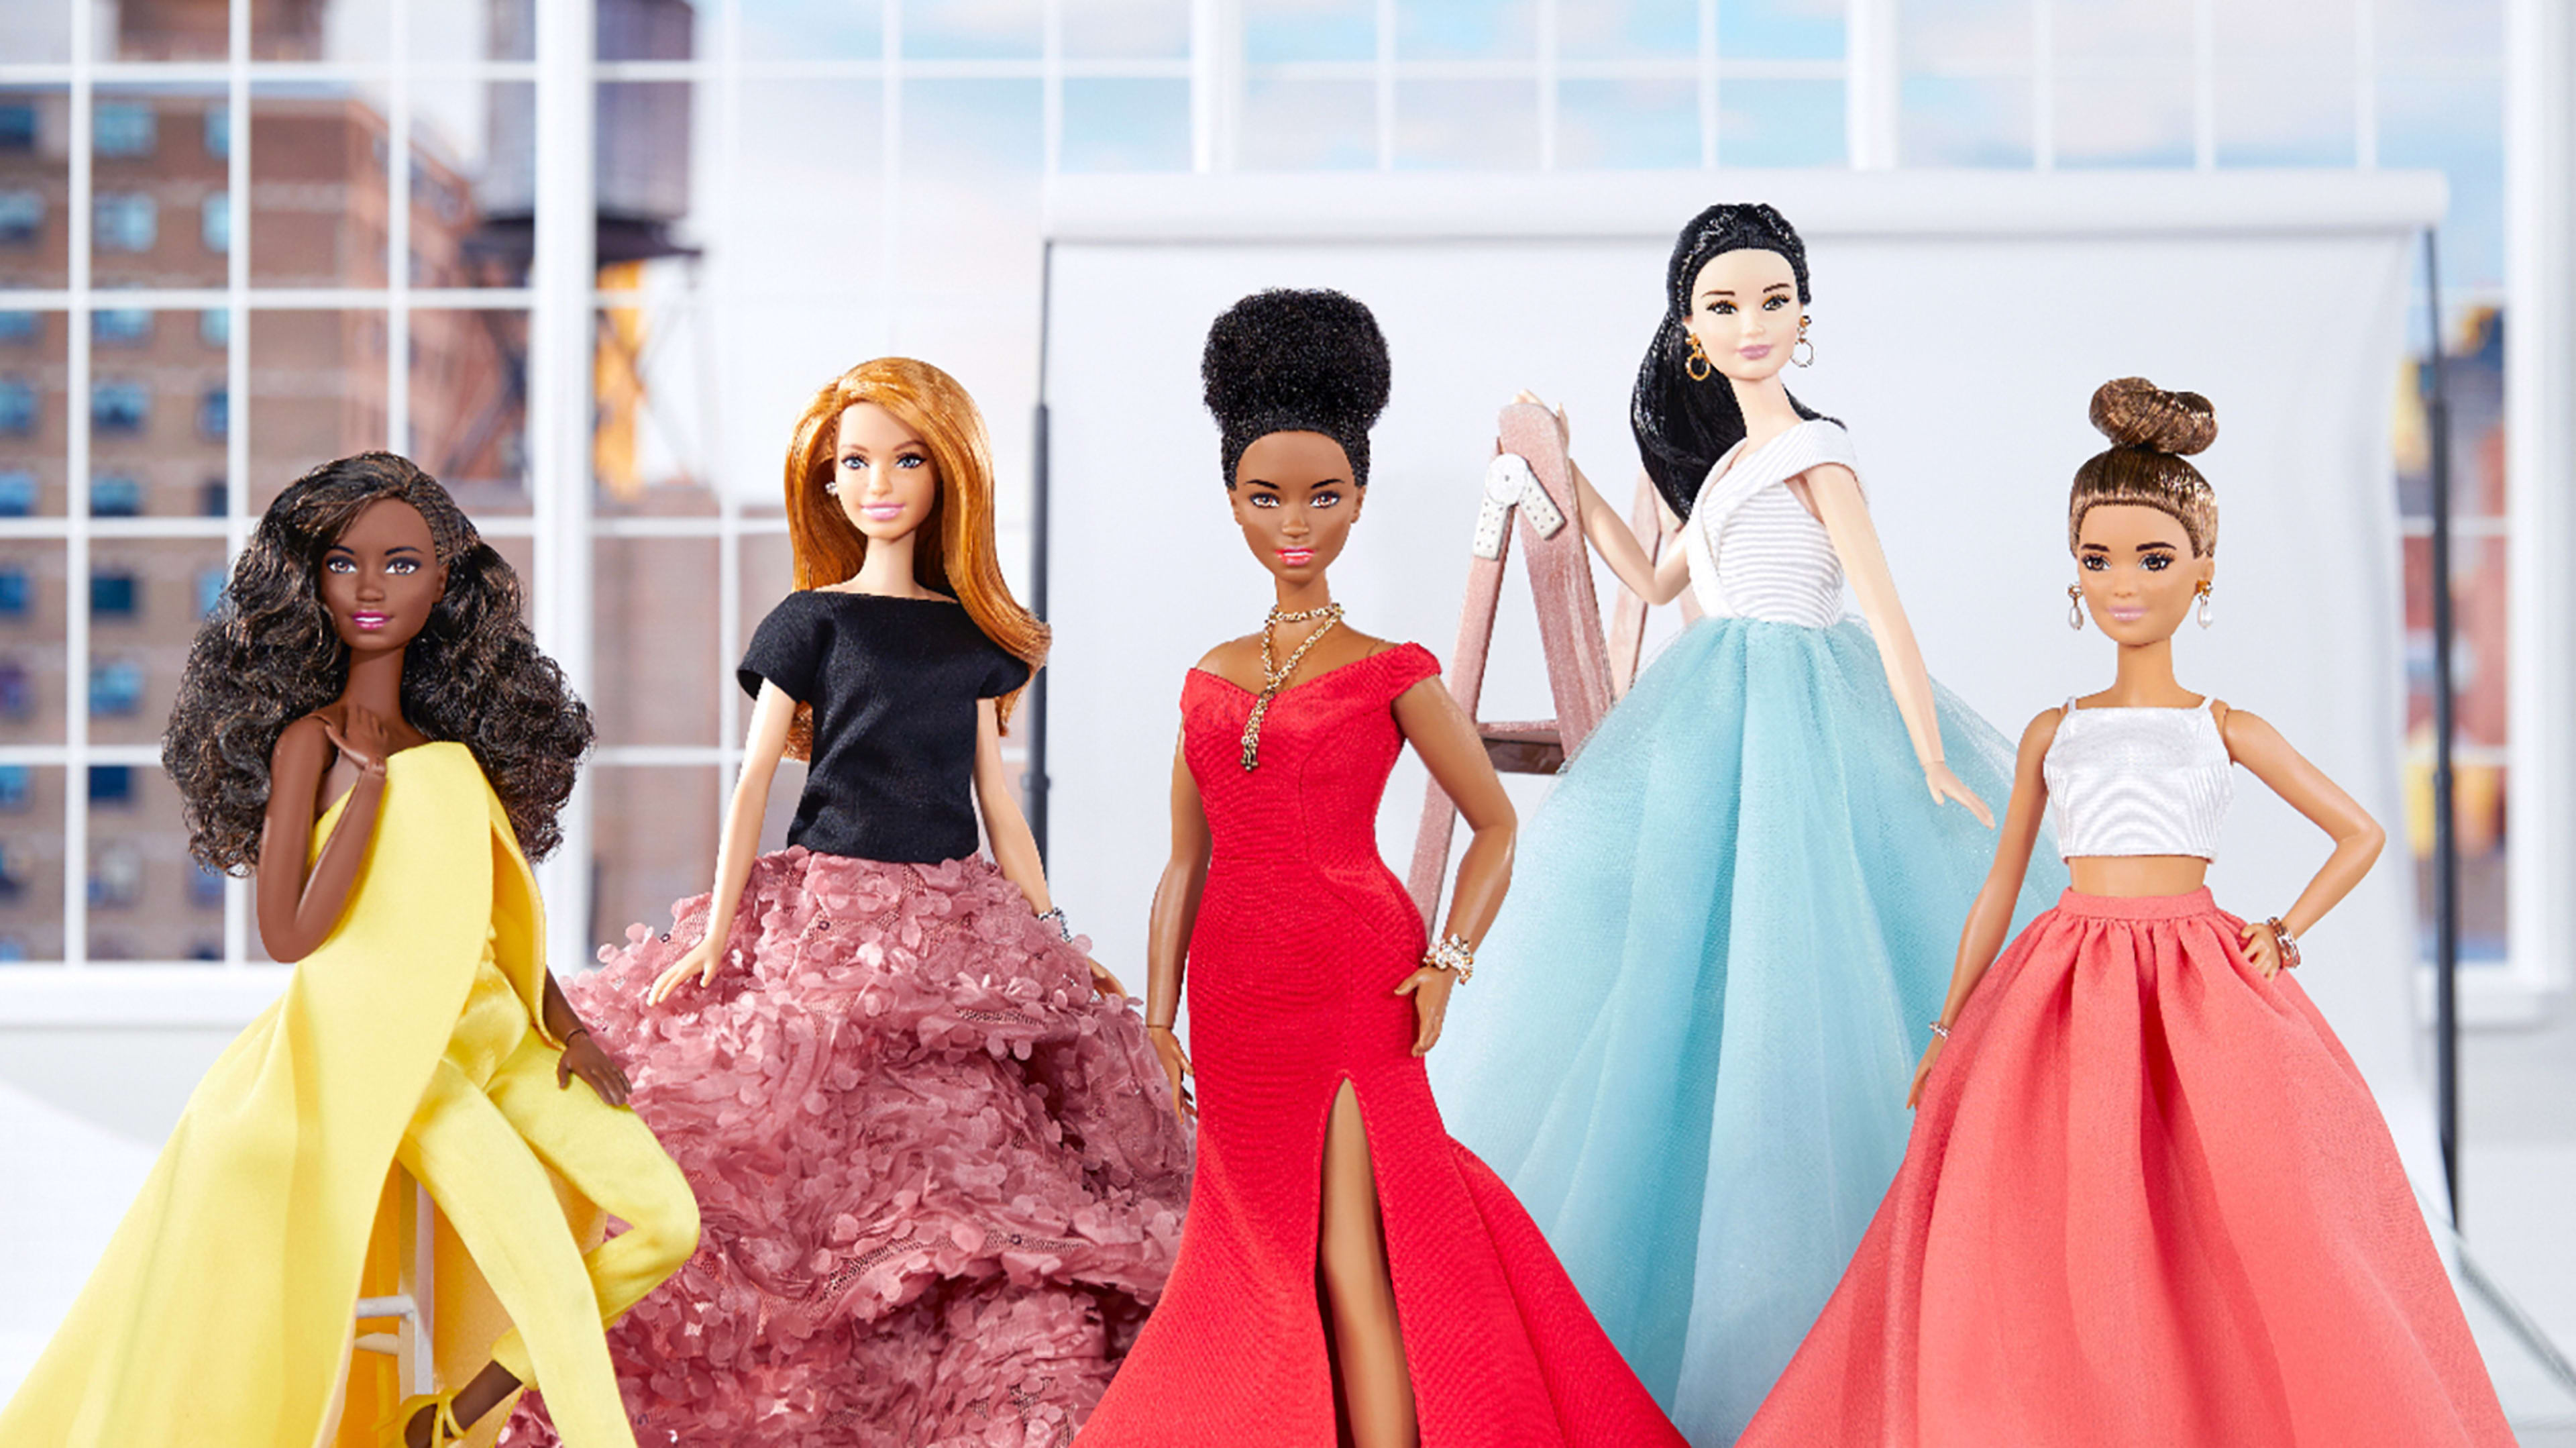 Barbie’s 17 New Skinny Dolls Are Not The “Role Models” Girls Need